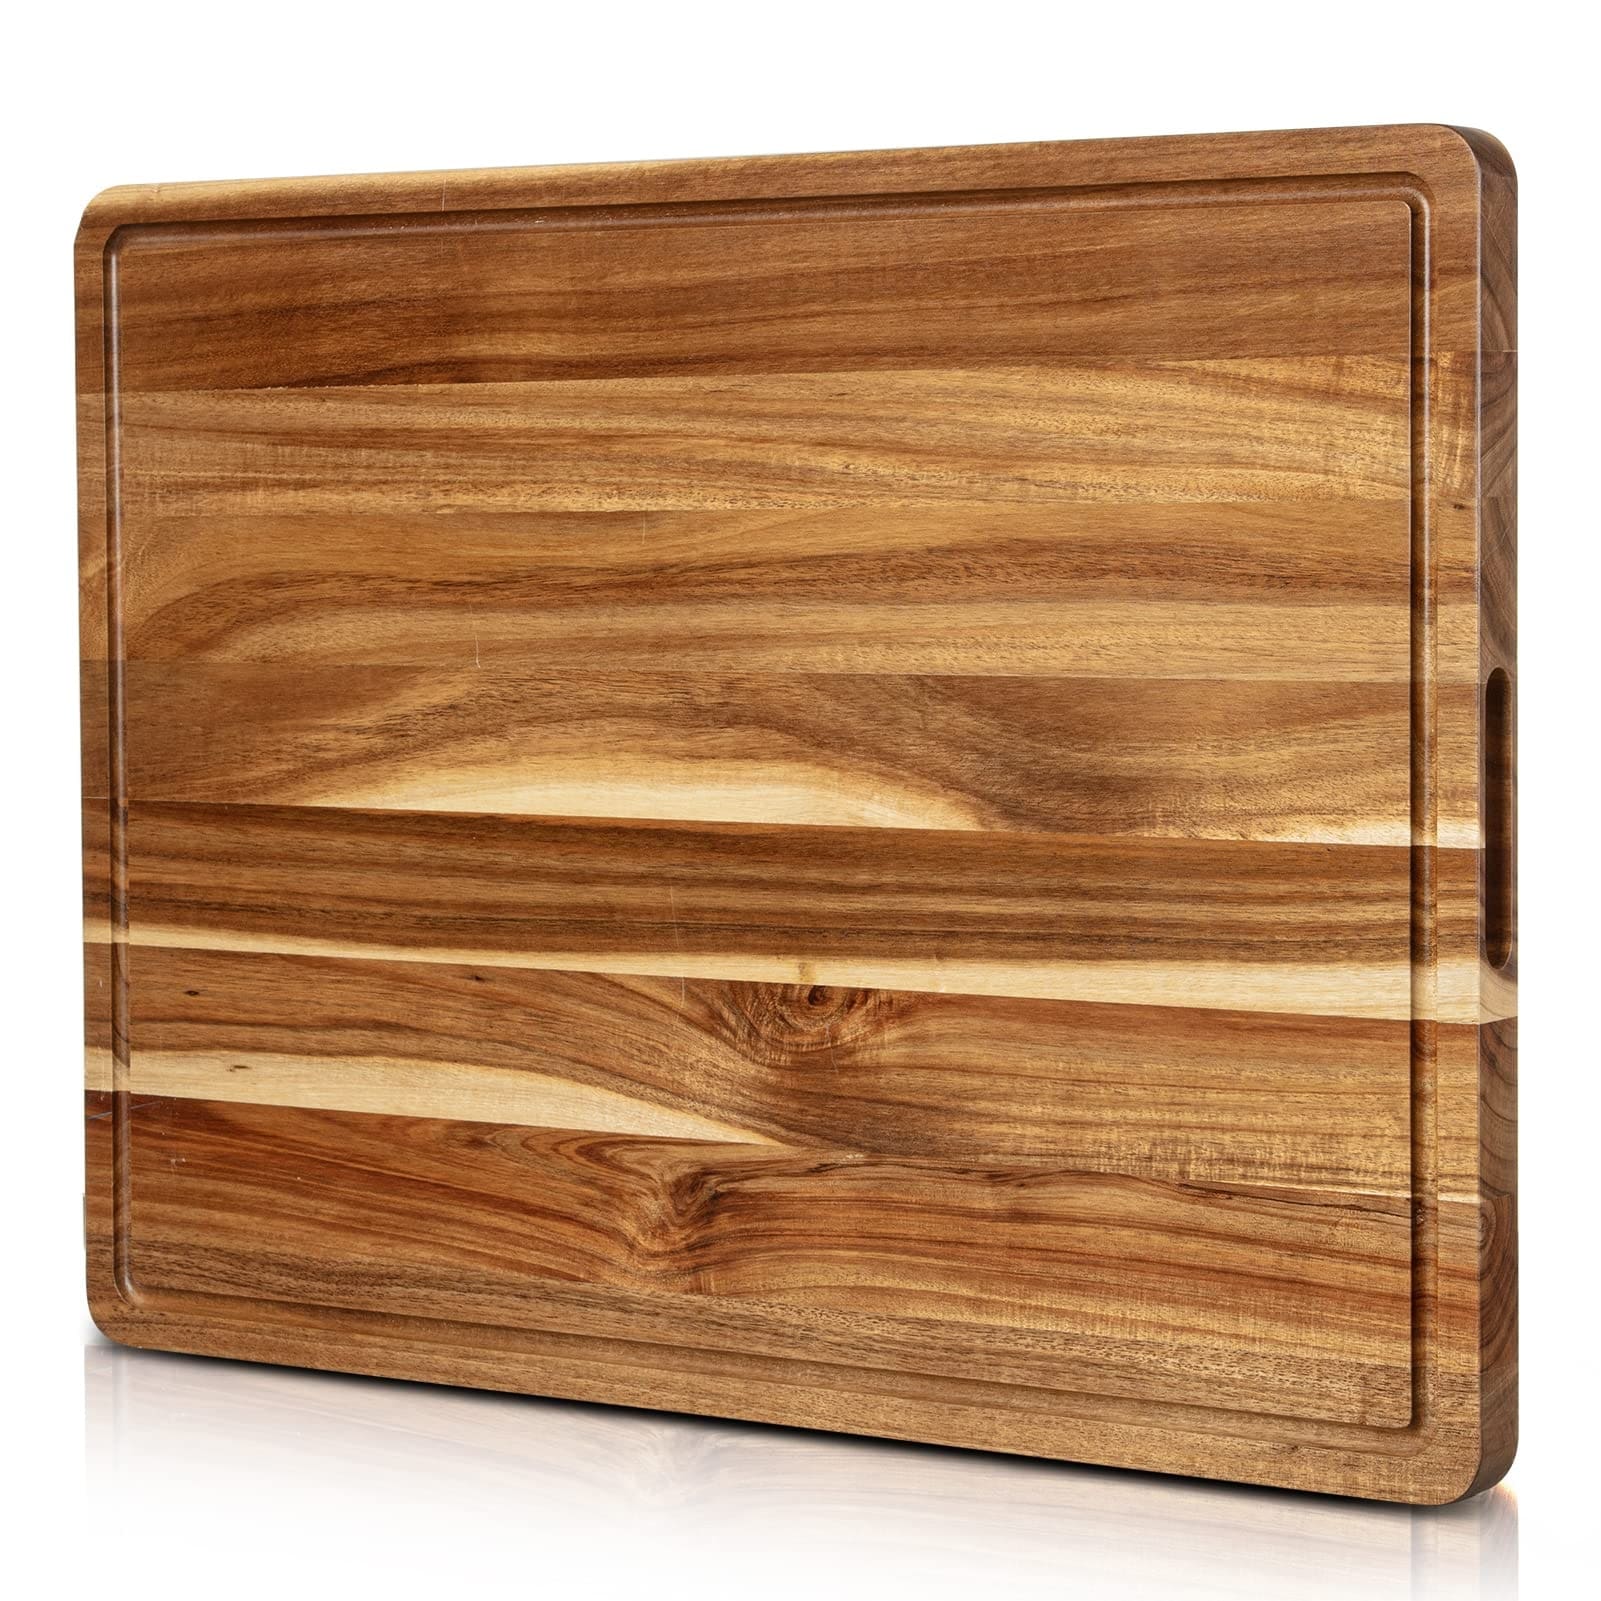 https://ak1.ostkcdn.com/images/products/is/images/direct/88fd95aed5a9f7c07bcd228ed9e0c68efd6db9cb/Wooden-Cutting-Boards-for-Kitchen.jpg